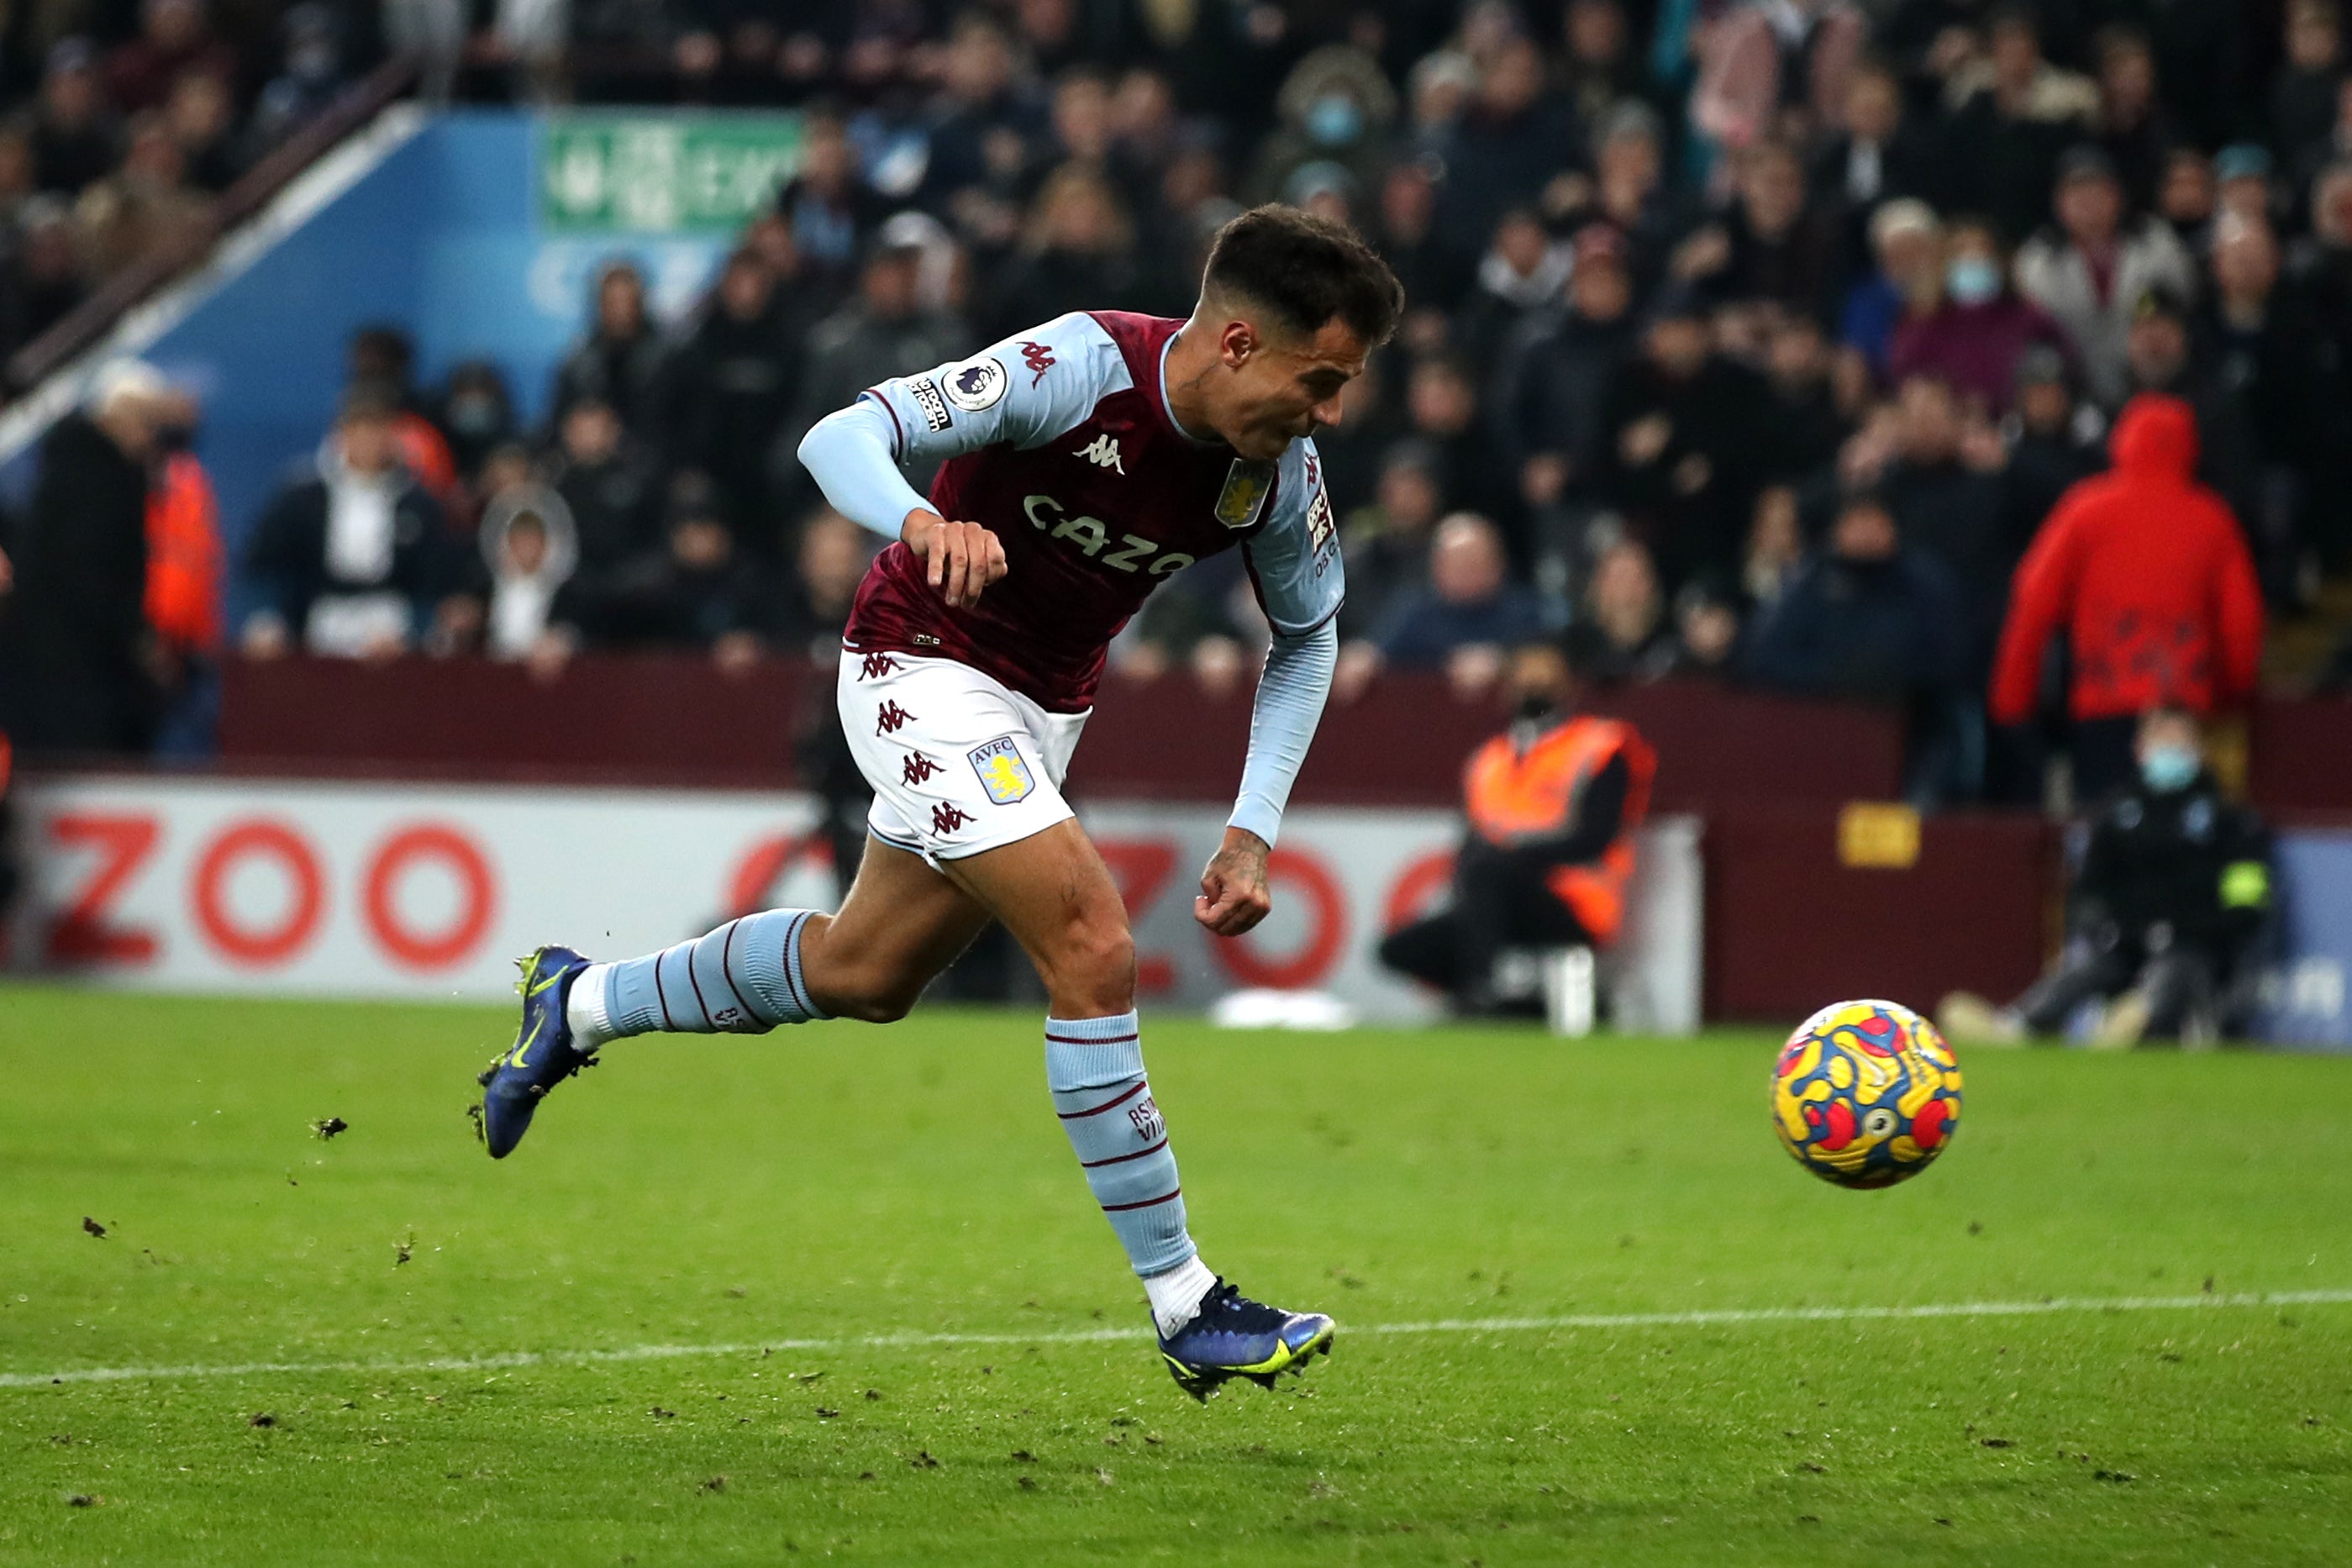 Philippe Coutinho taps home Aston Villa’s equaliser (Isaac Parkin/PA)